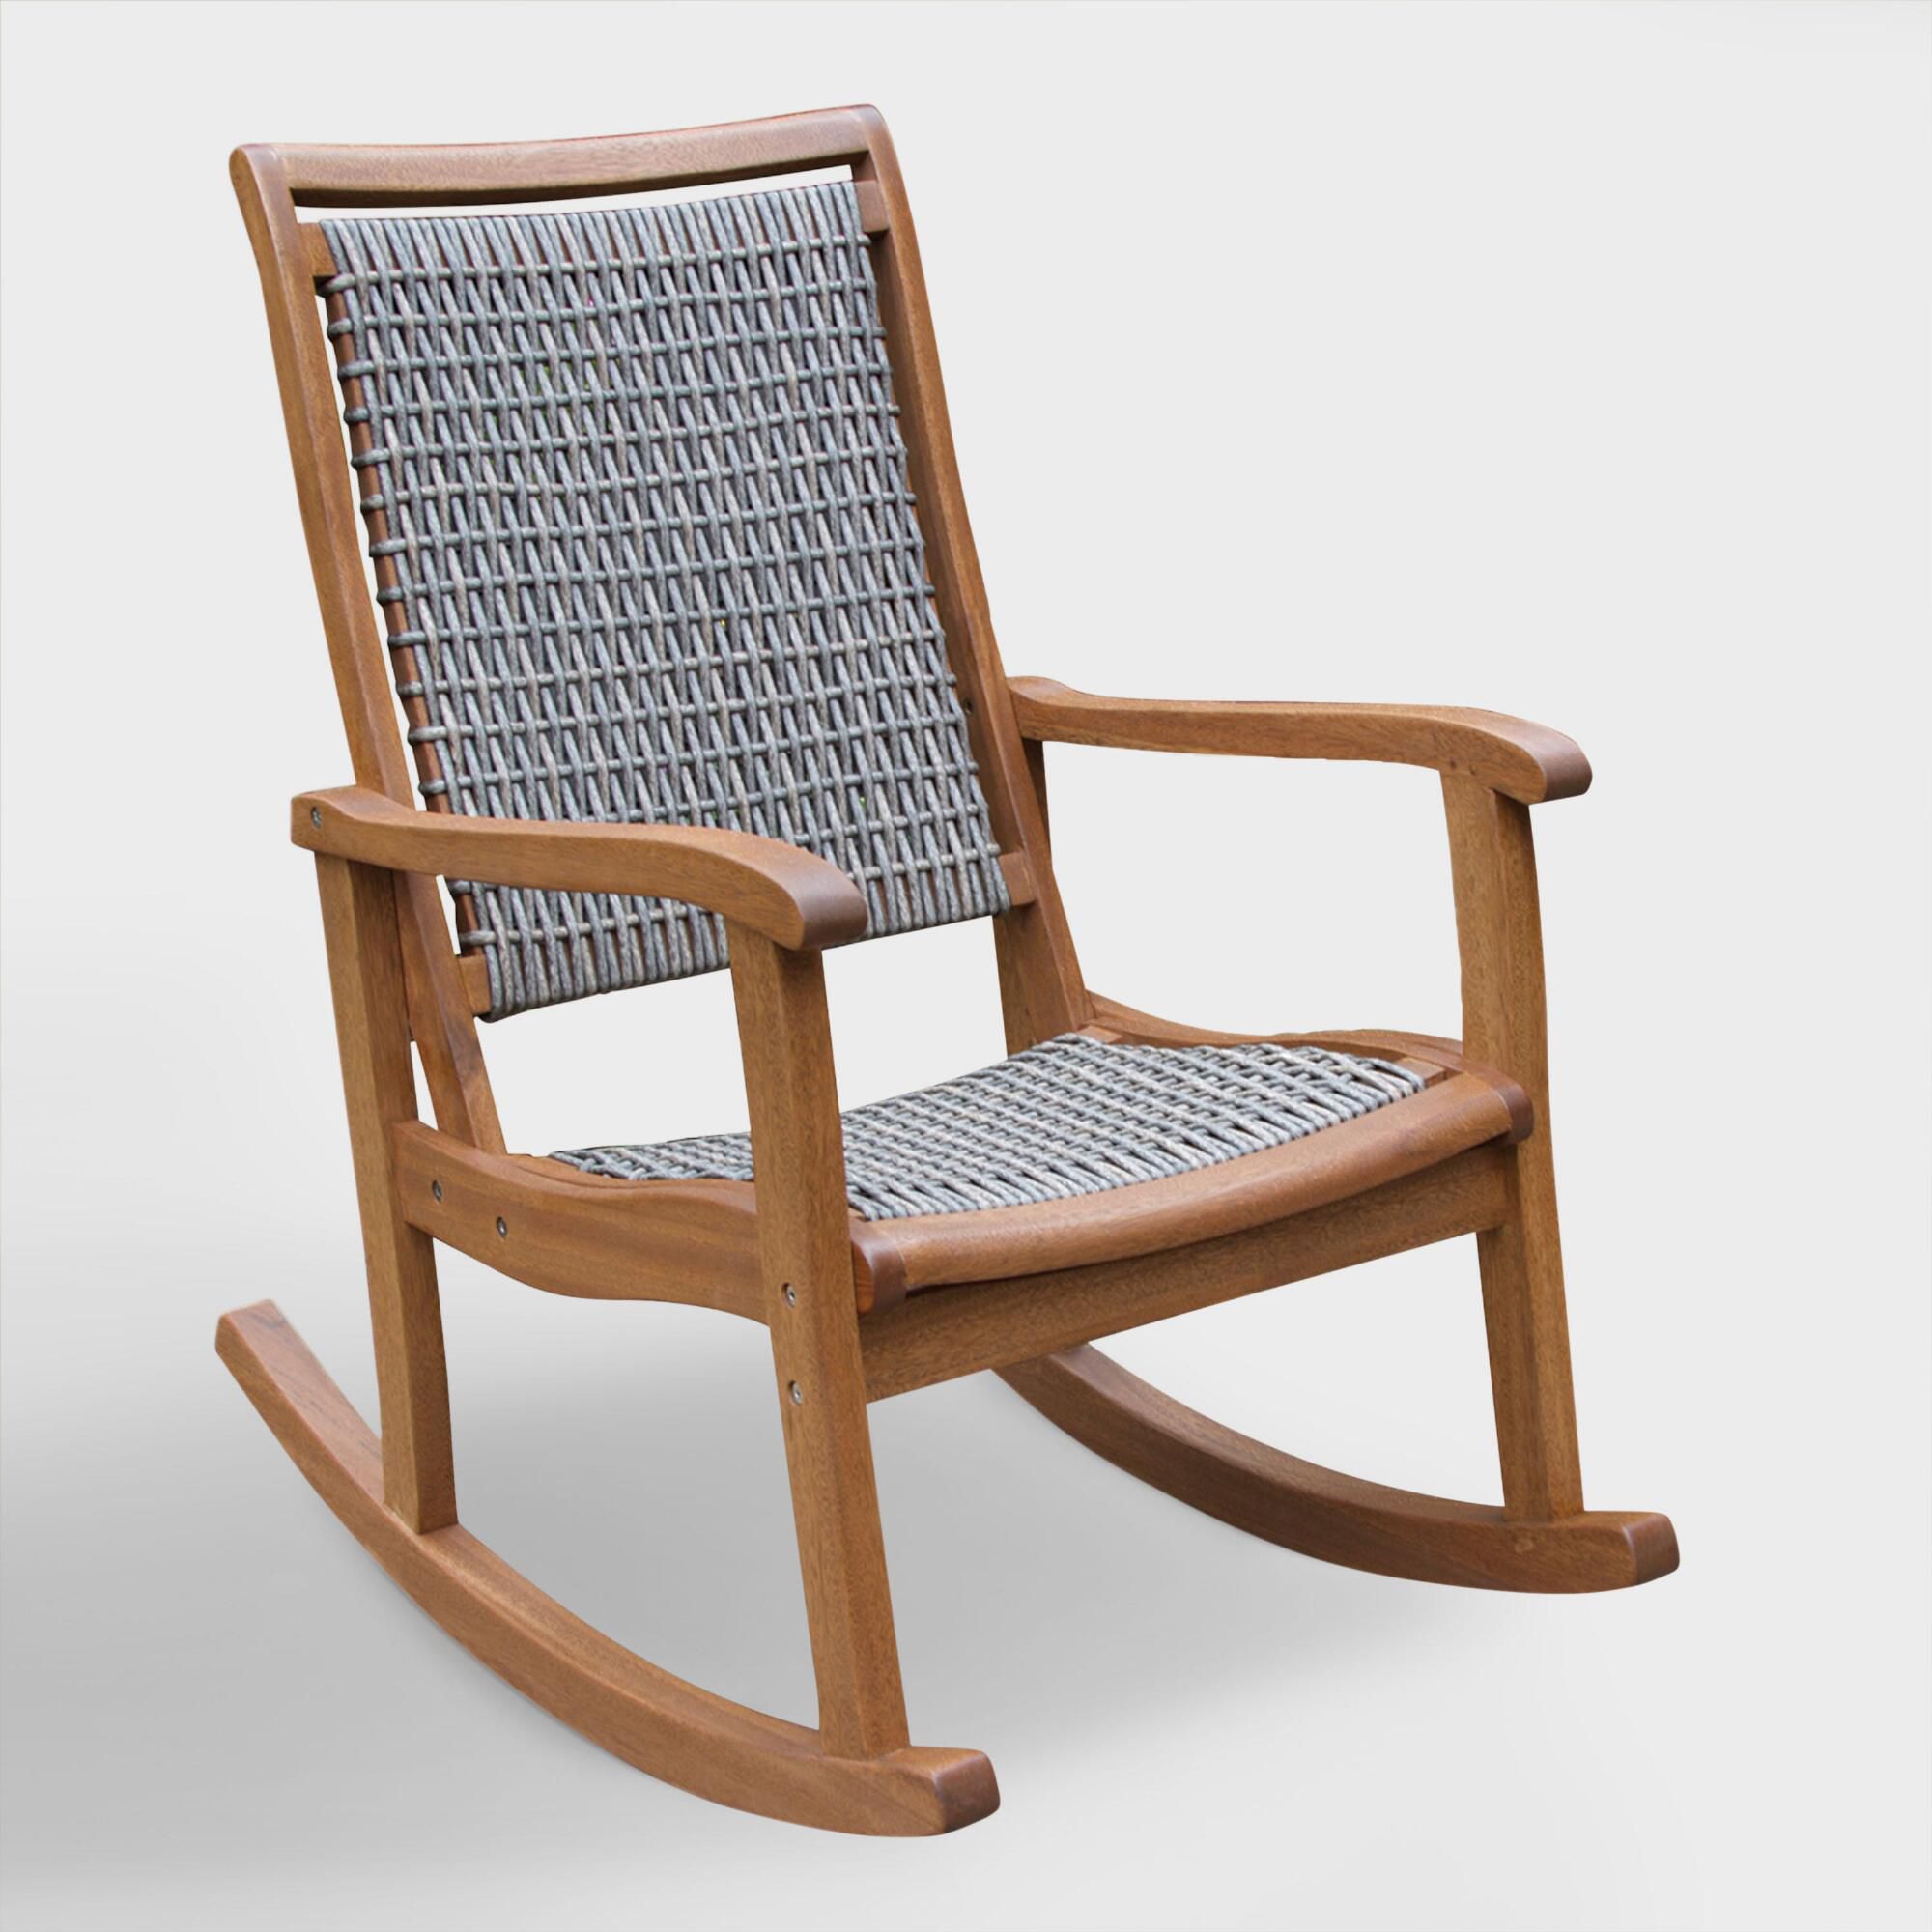 Ideas, Outdoor Rocking Chair : Pictures